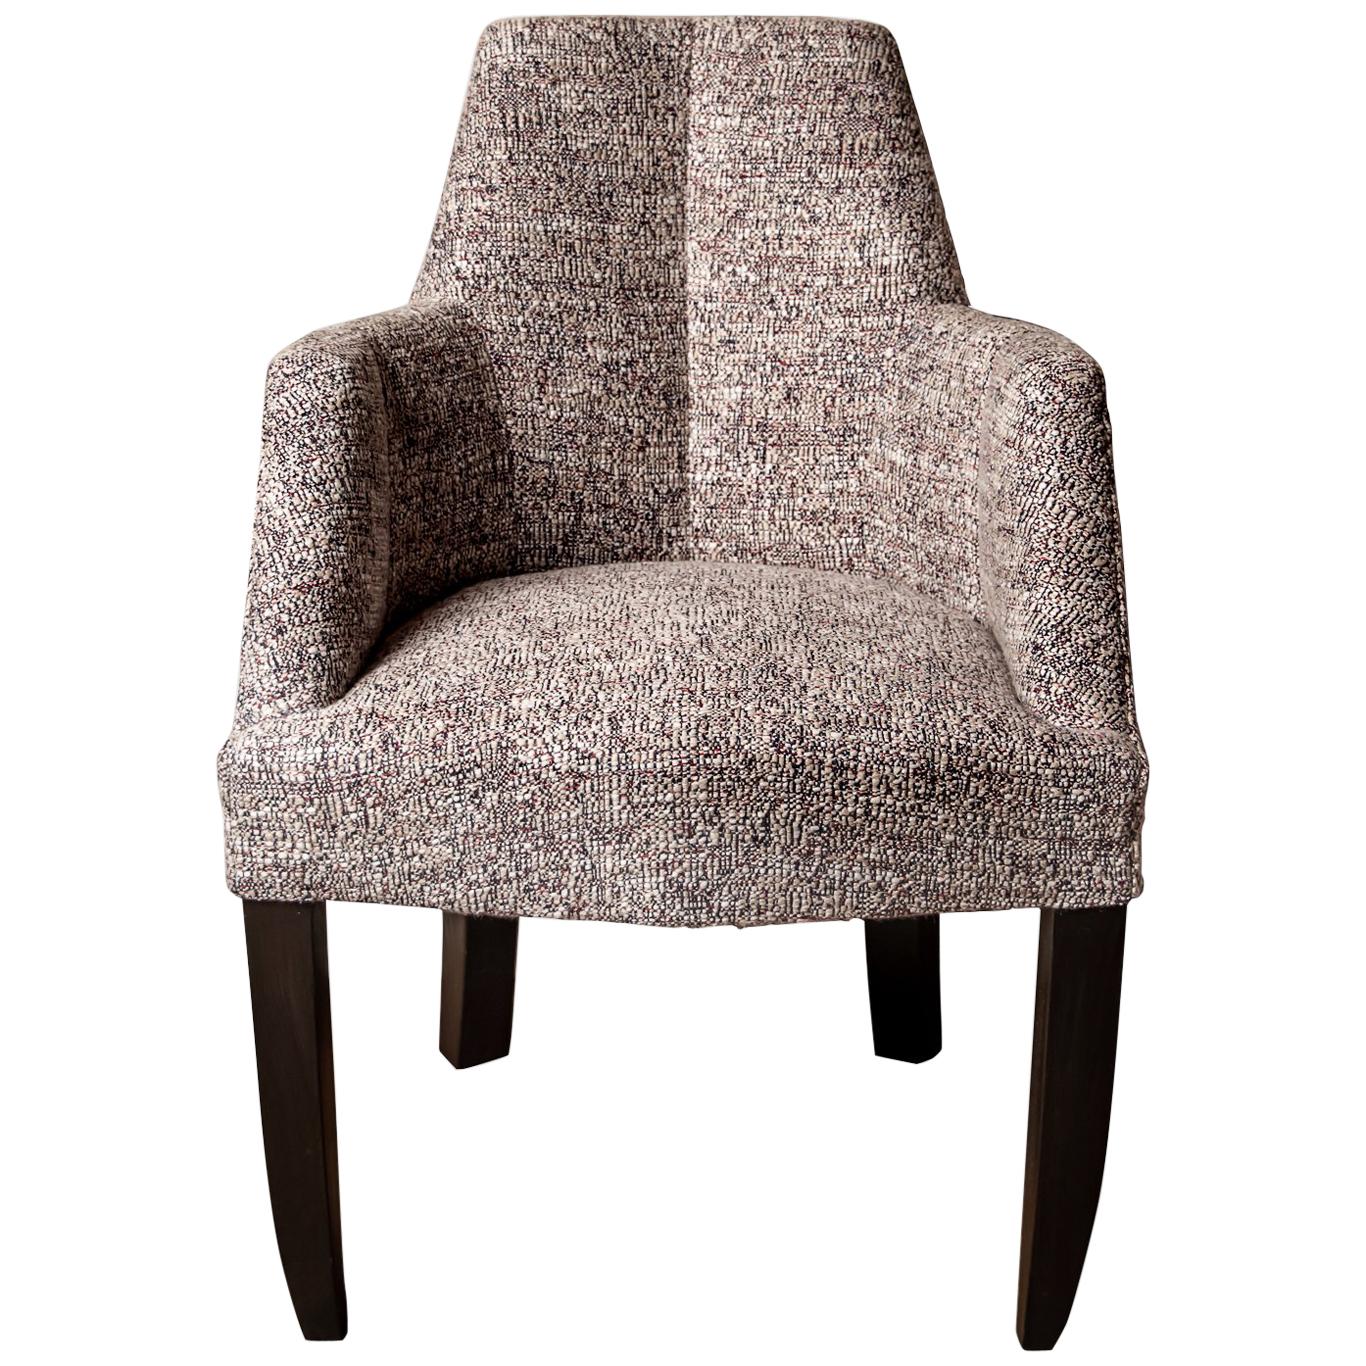 Rumi - faceted design upholstered armchair/dining chair by Toad Gallery London 